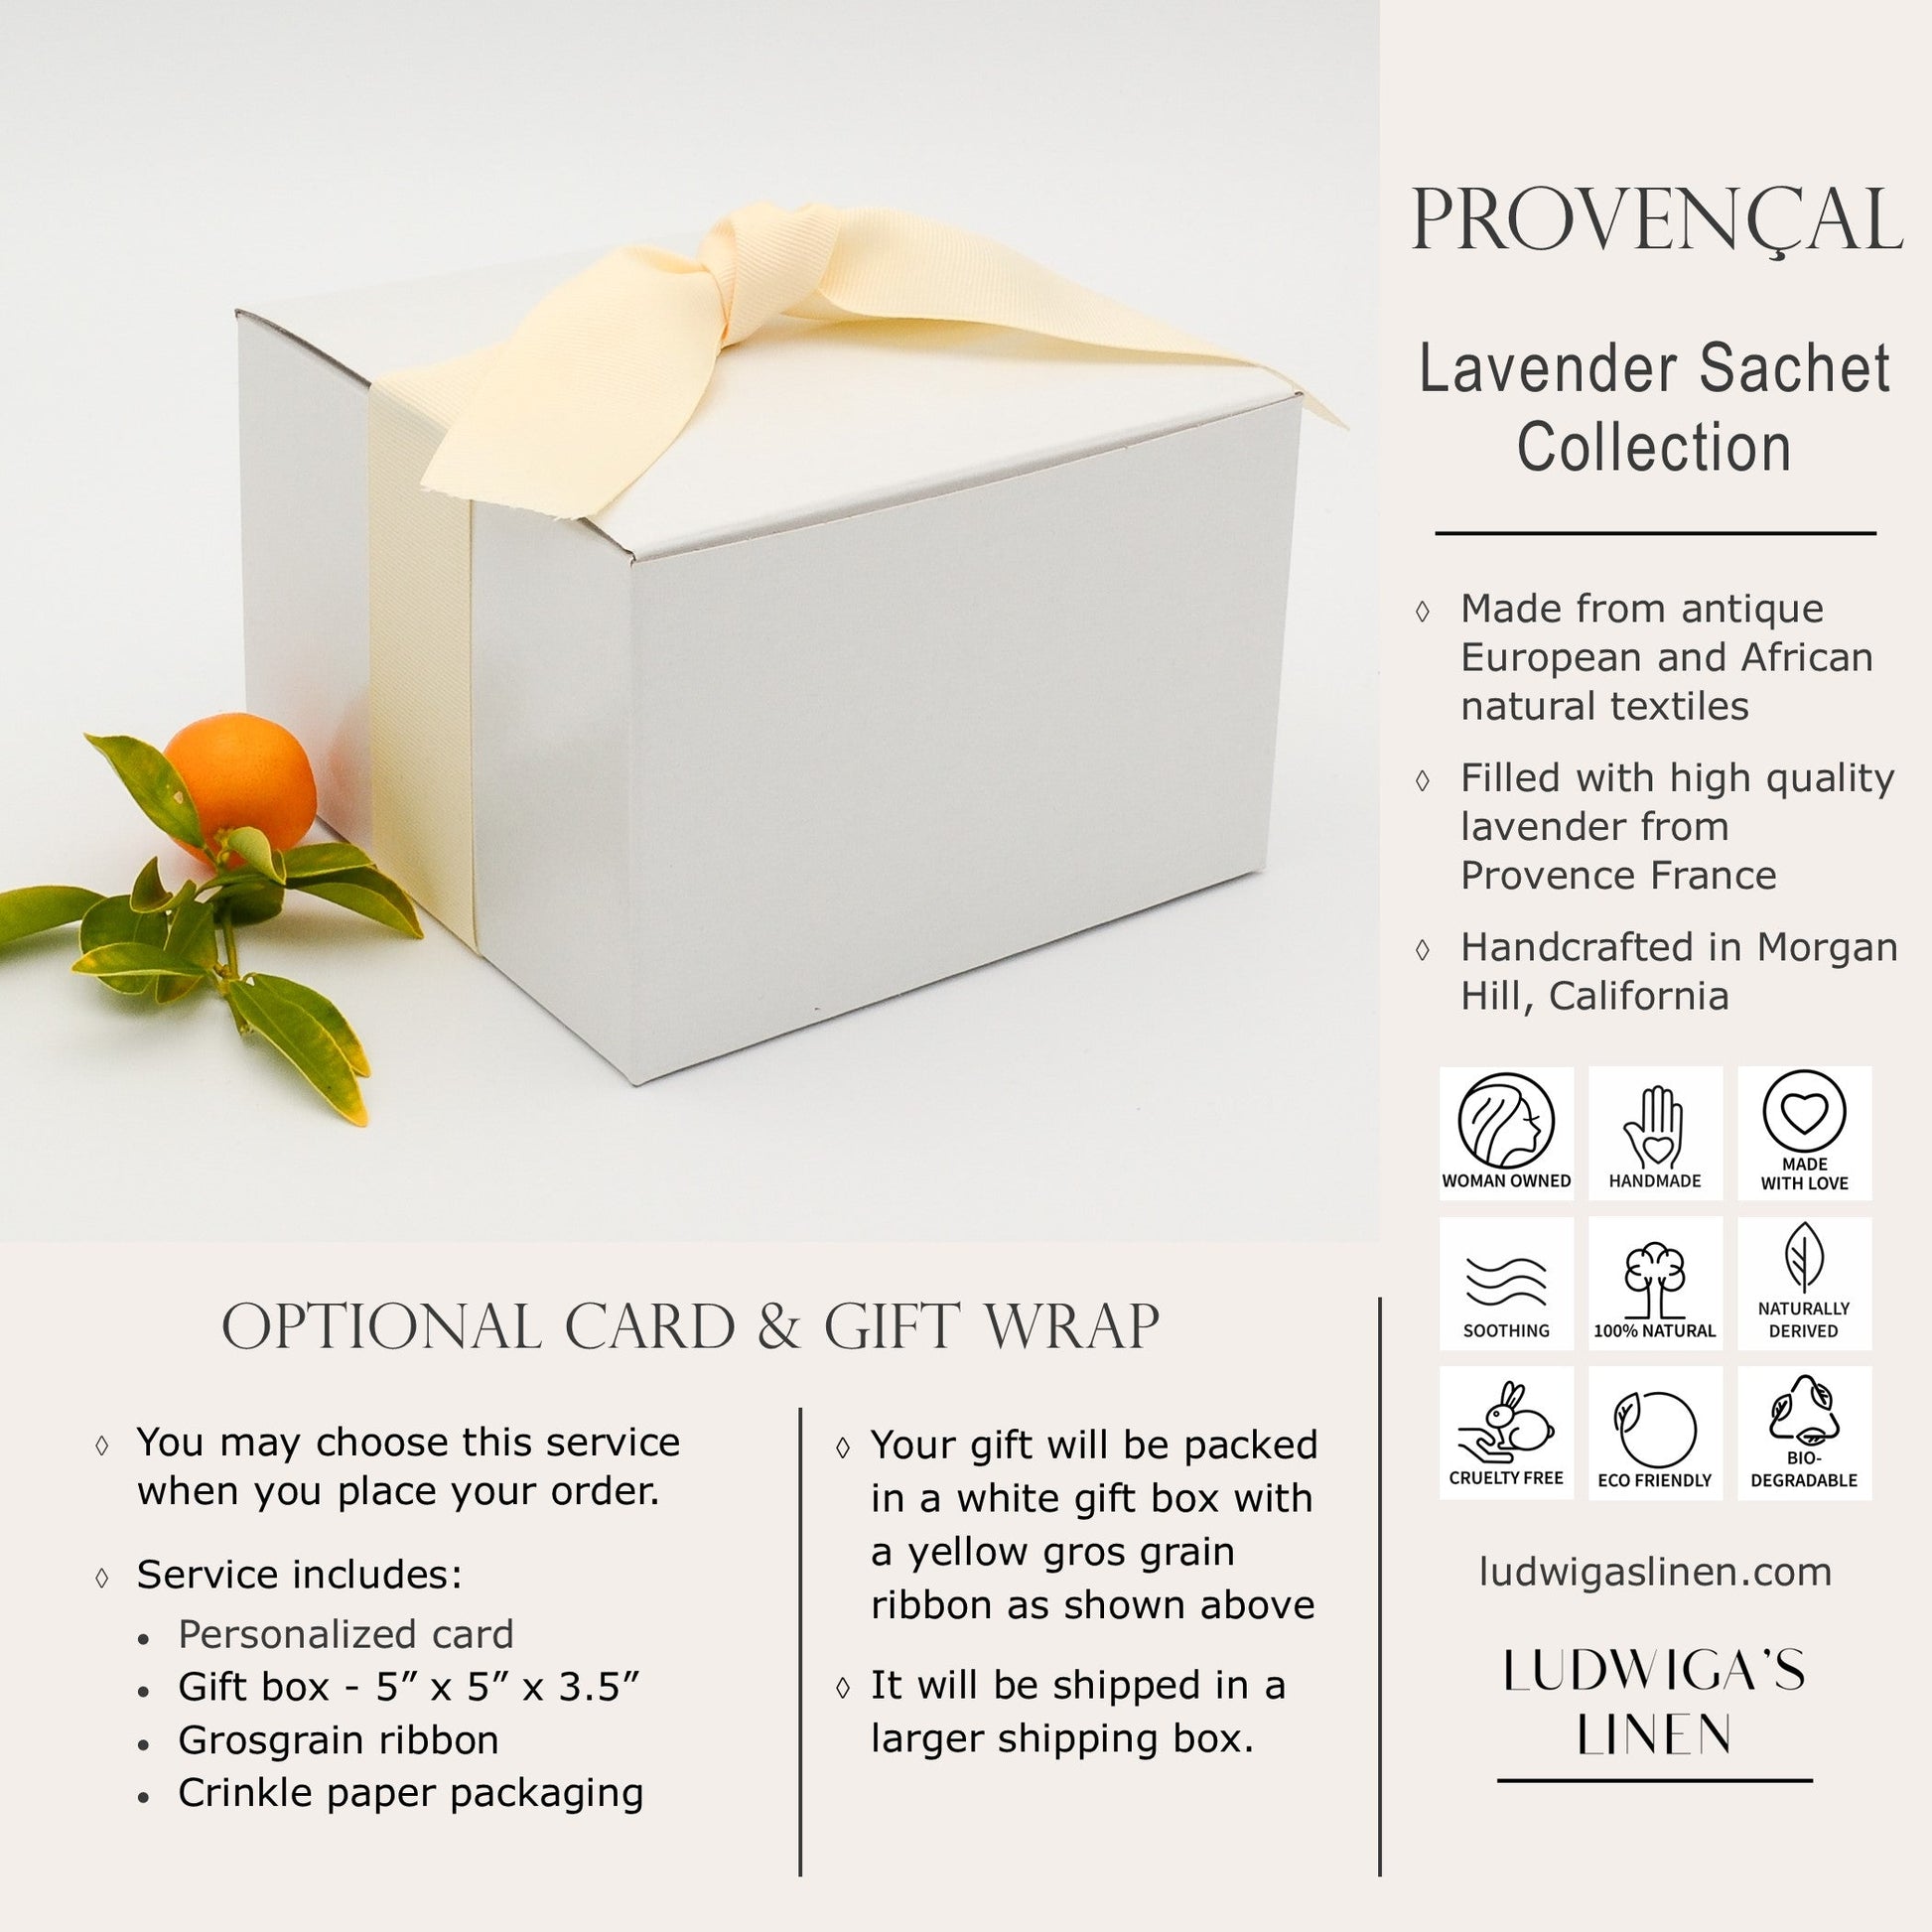 Optional gift box with red gros grain ribbon, information about Ludwiga's Linen Provençal sachet collection and shipping information